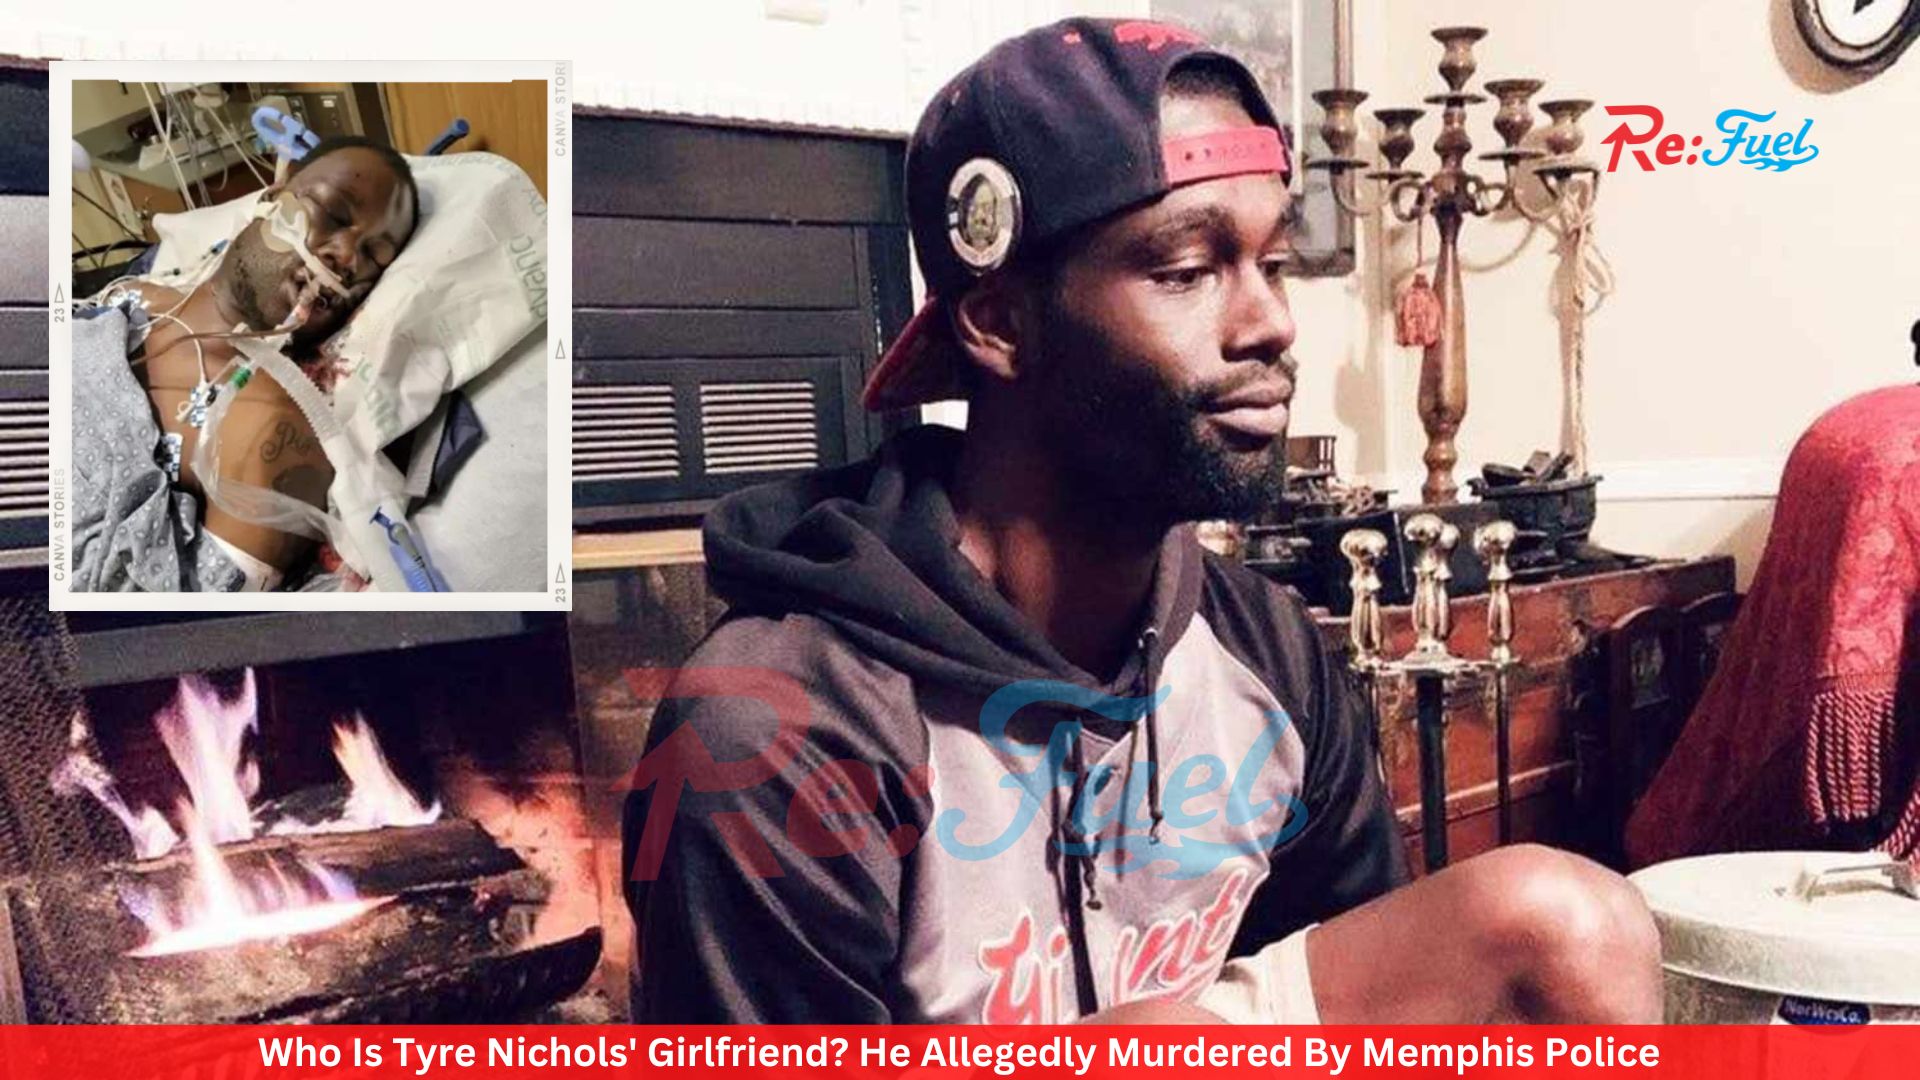 Who Is Tyre Nichols' Girlfriend? He Allegedly Murdered By Memphis Police